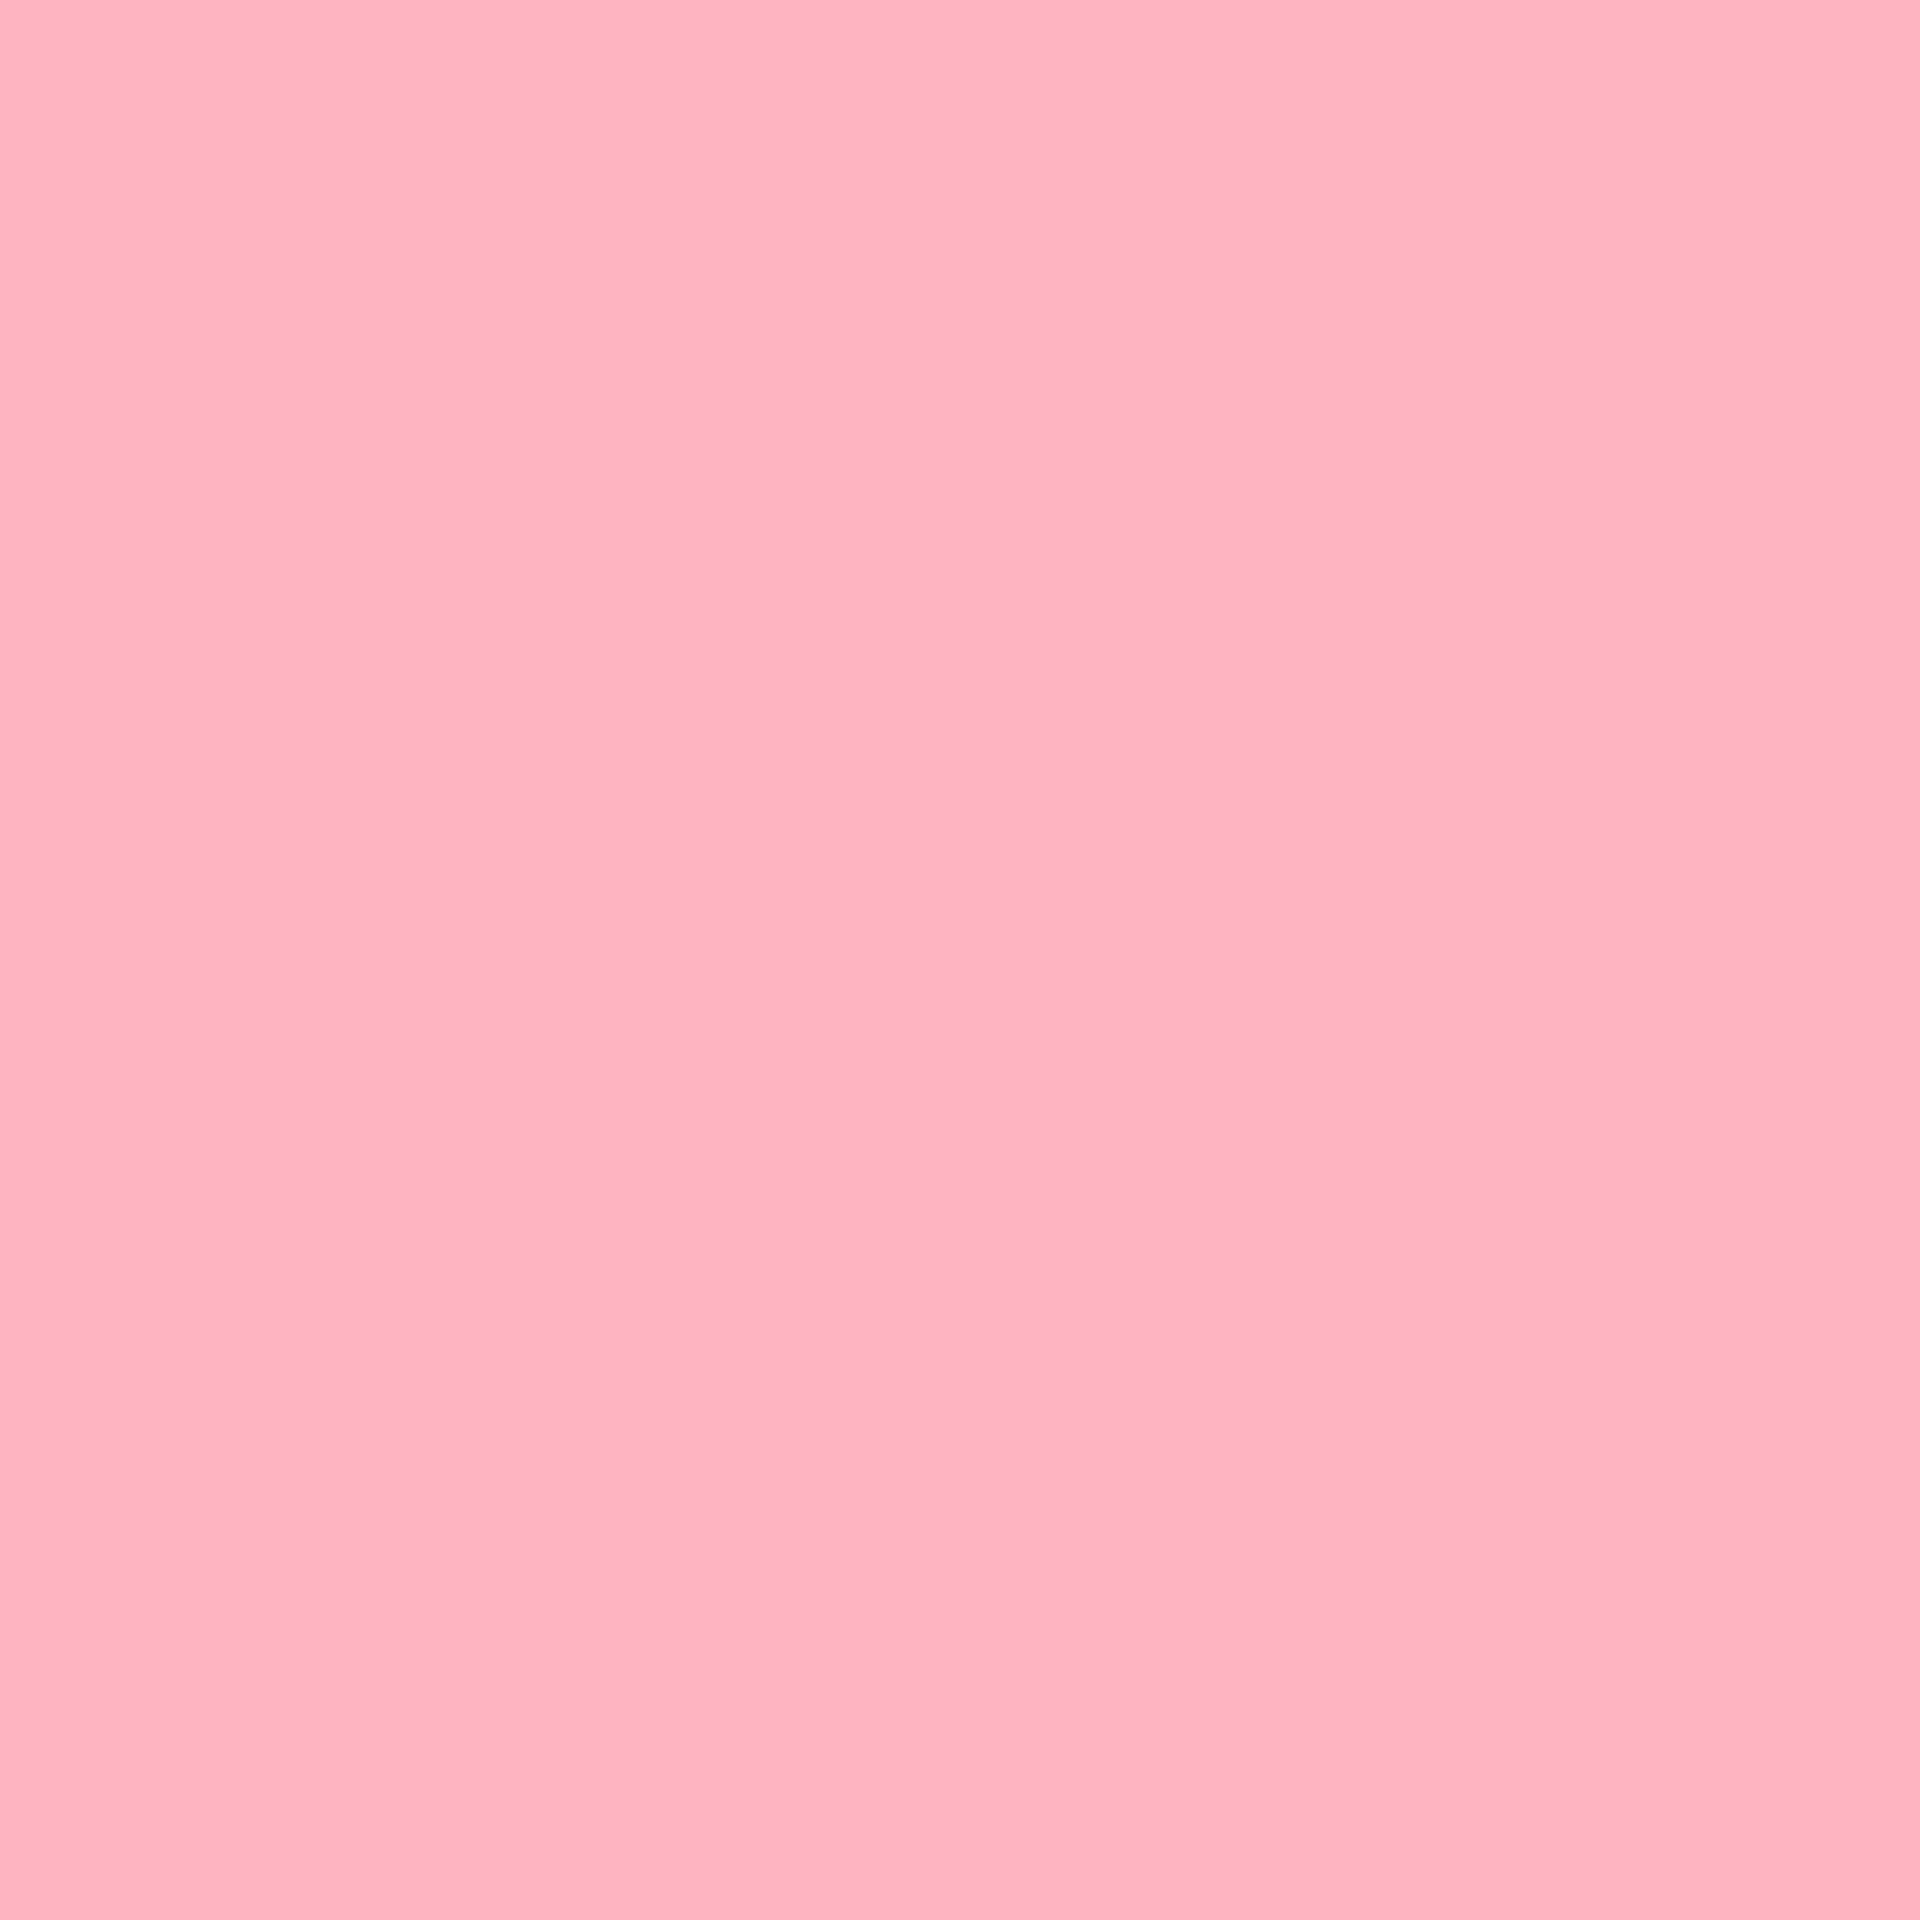 Soft Blush - An Aesthetic Light Pink Background